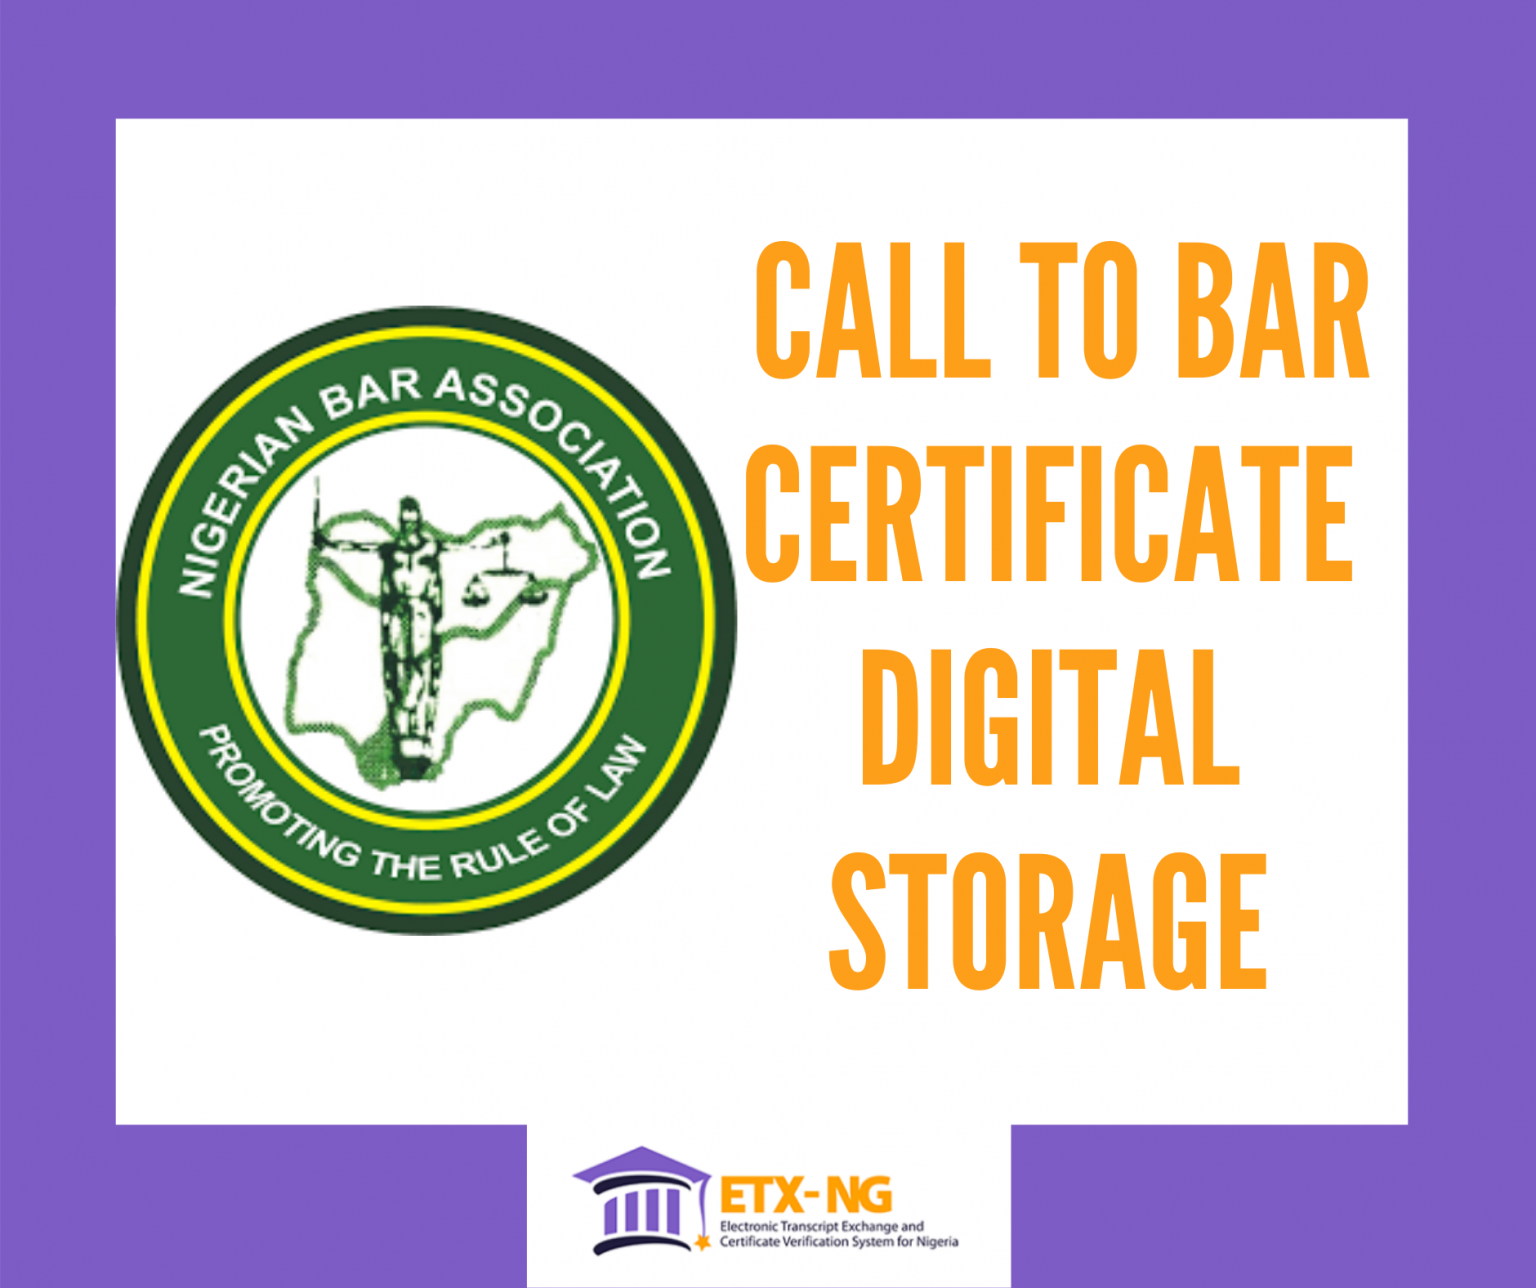 Call to Bar Certificate MyCredentials Arena